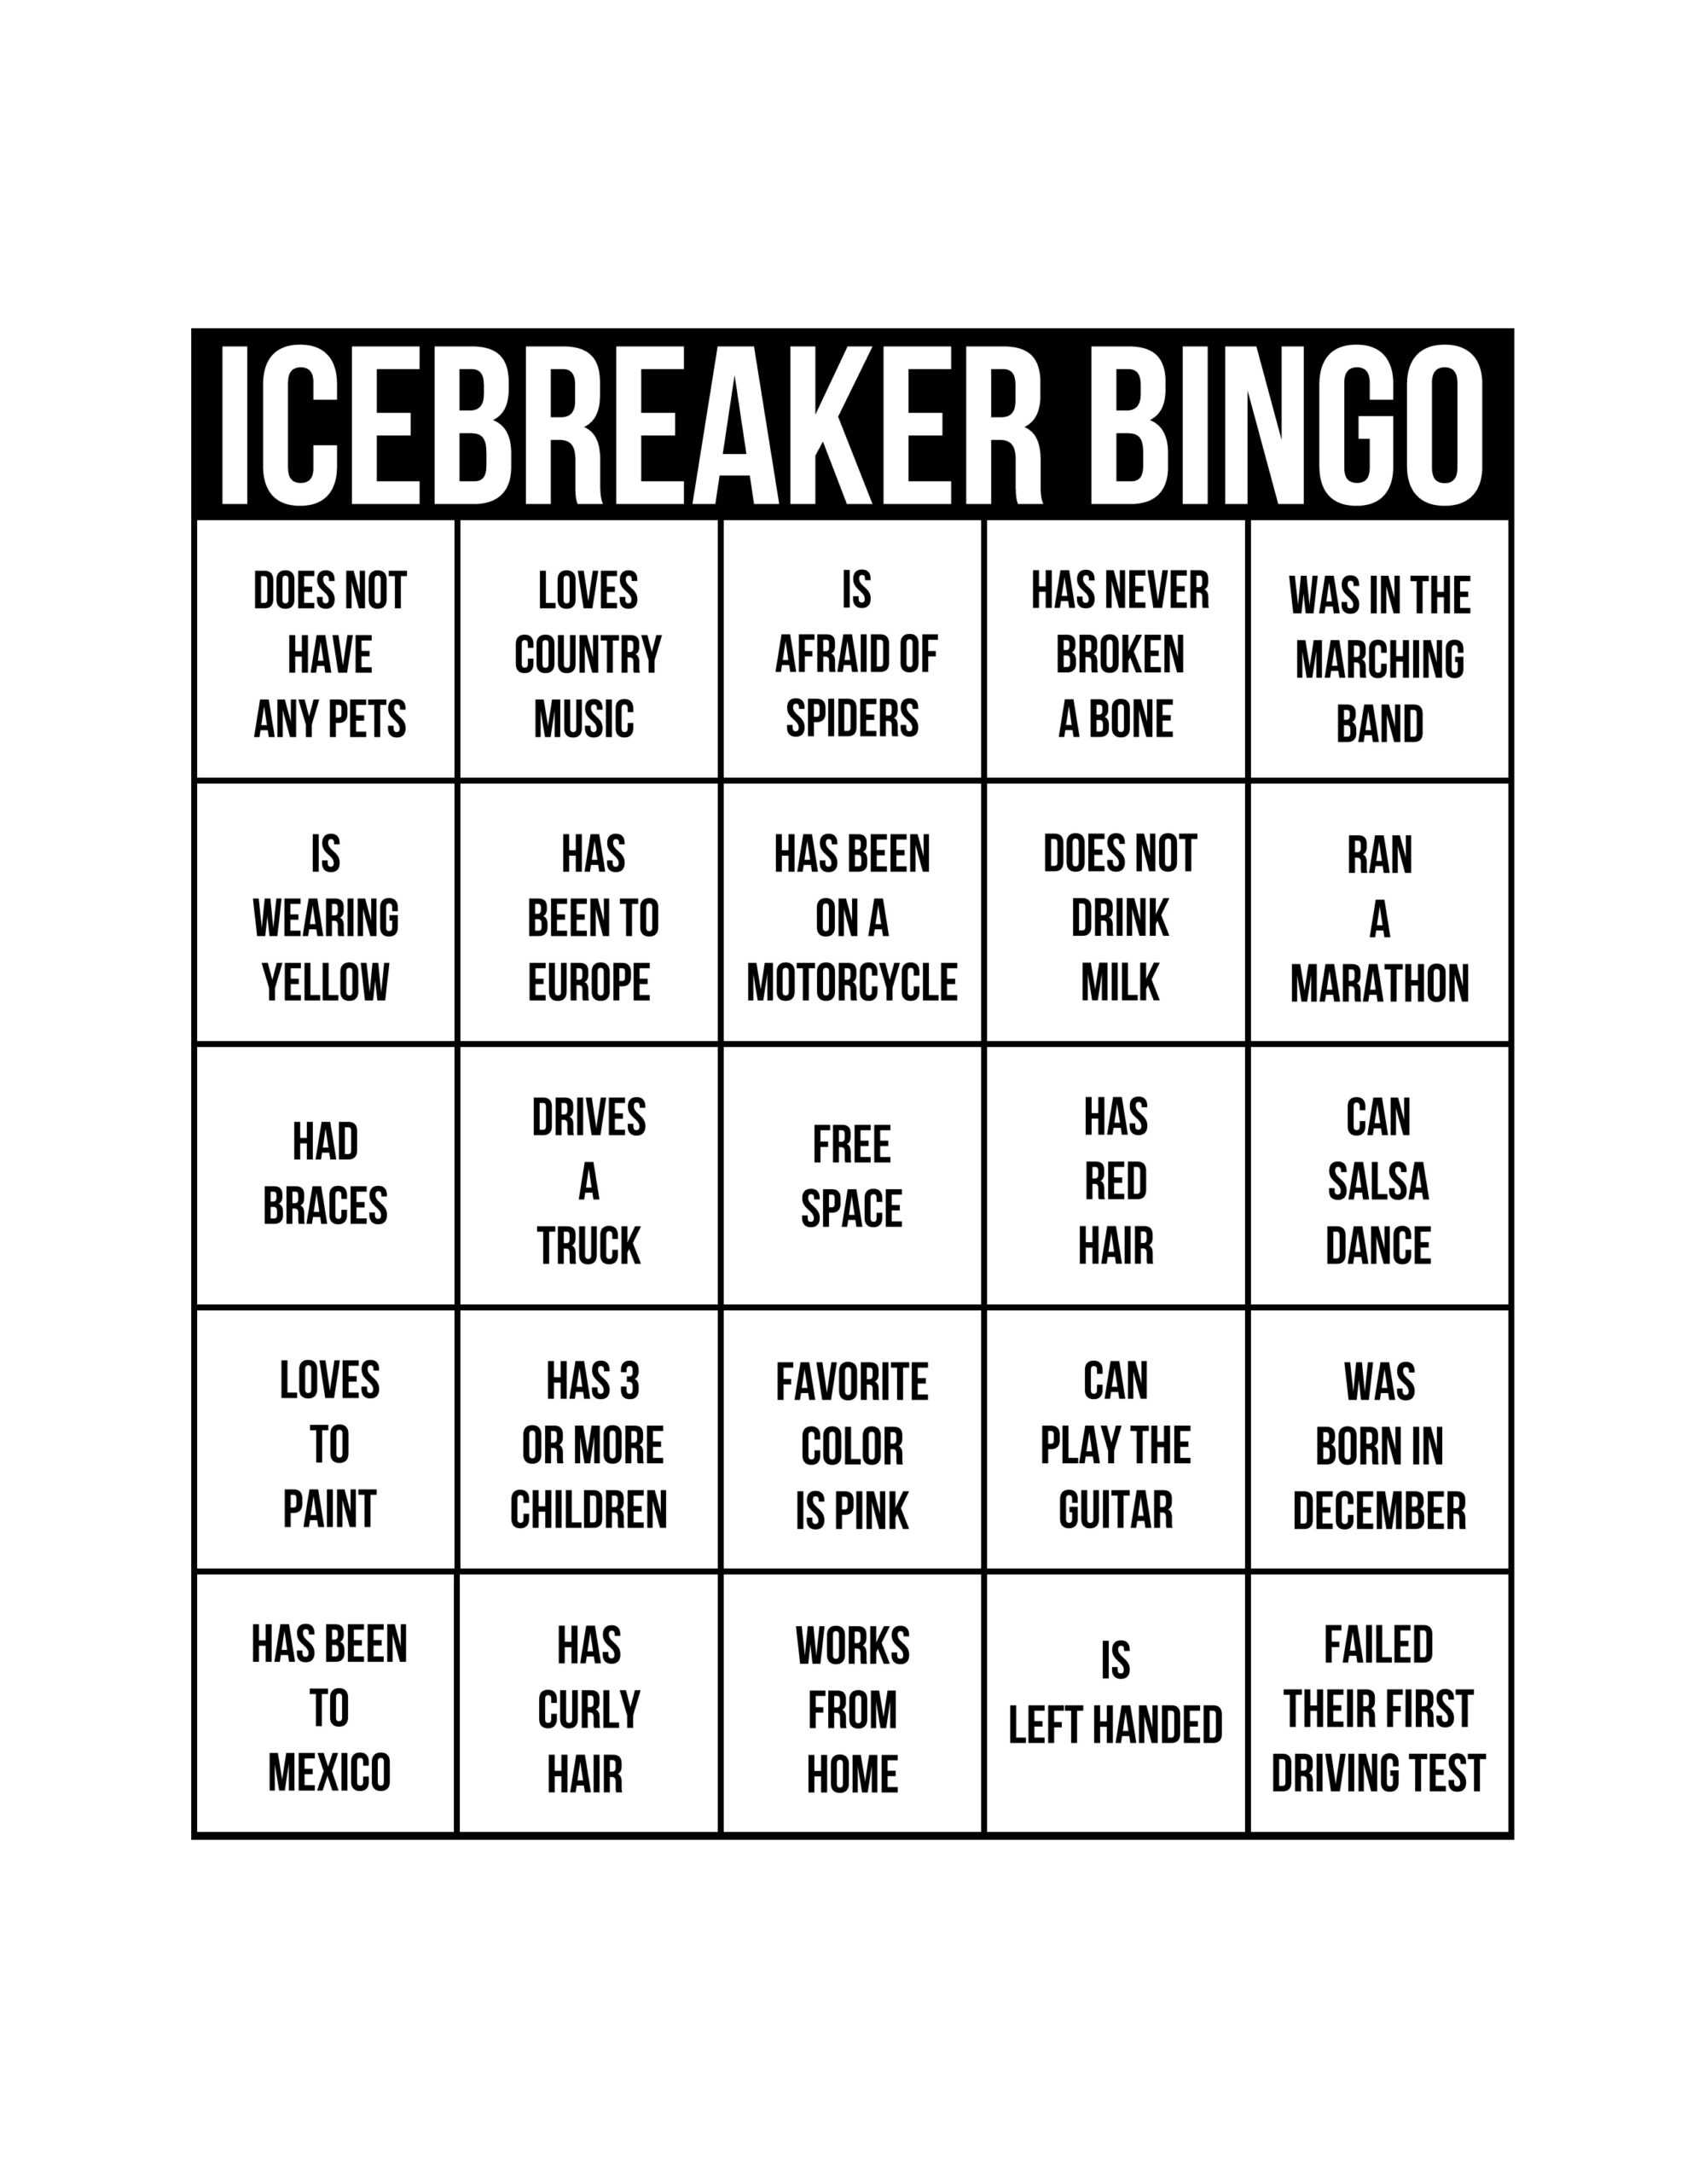 24 Images Of Icebreaker Bingo Game Template For Work With Regard To Ice Breaker Bingo Card Template